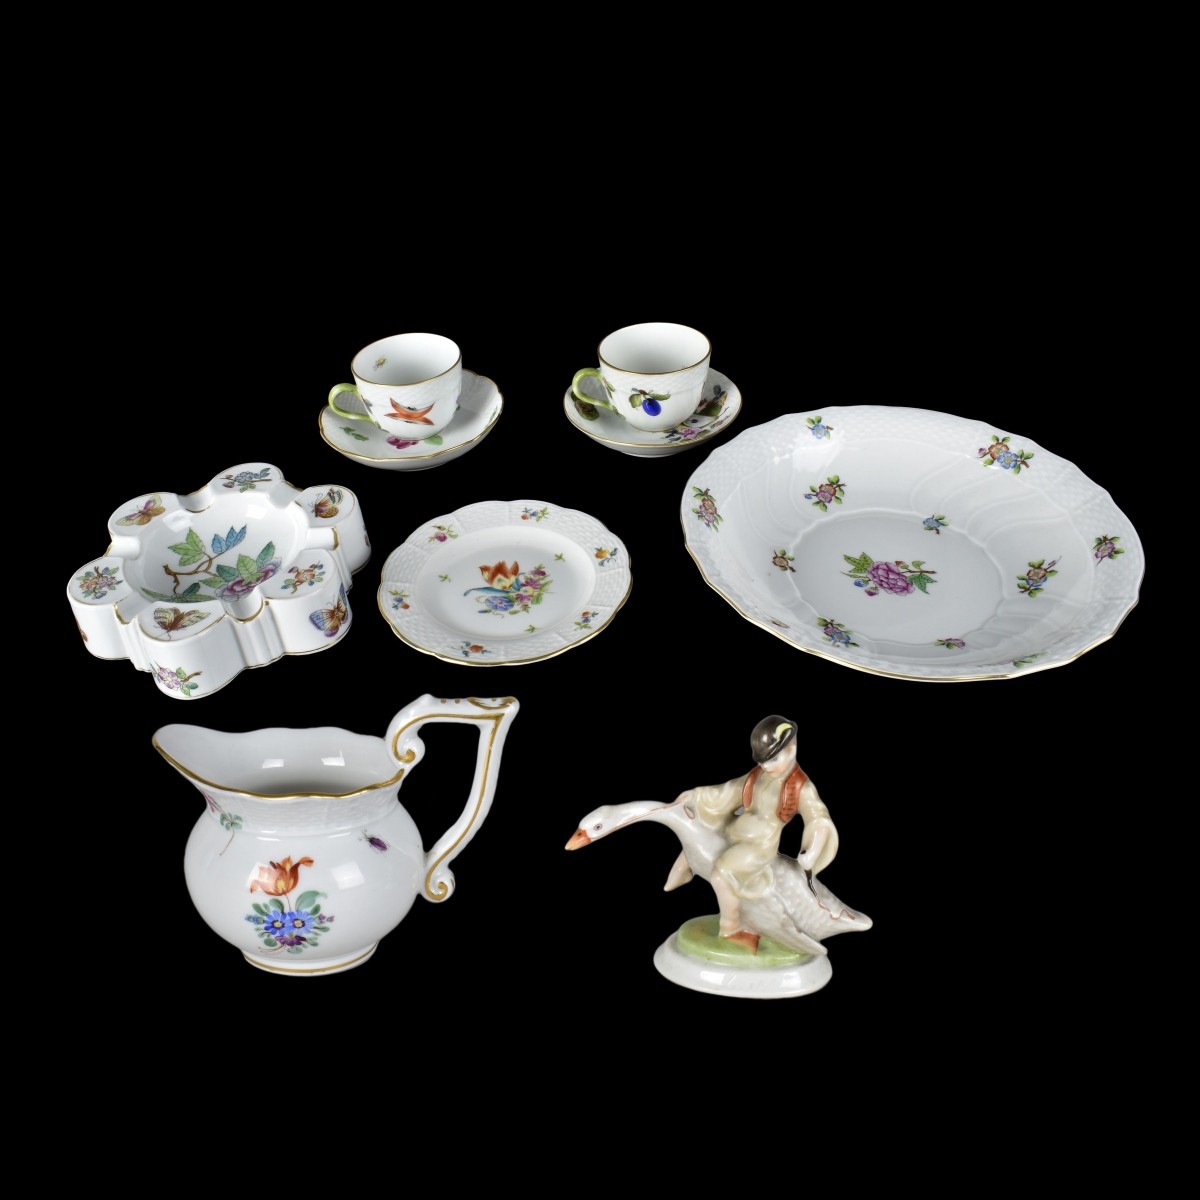 Collection Herend Porcelain Tableware